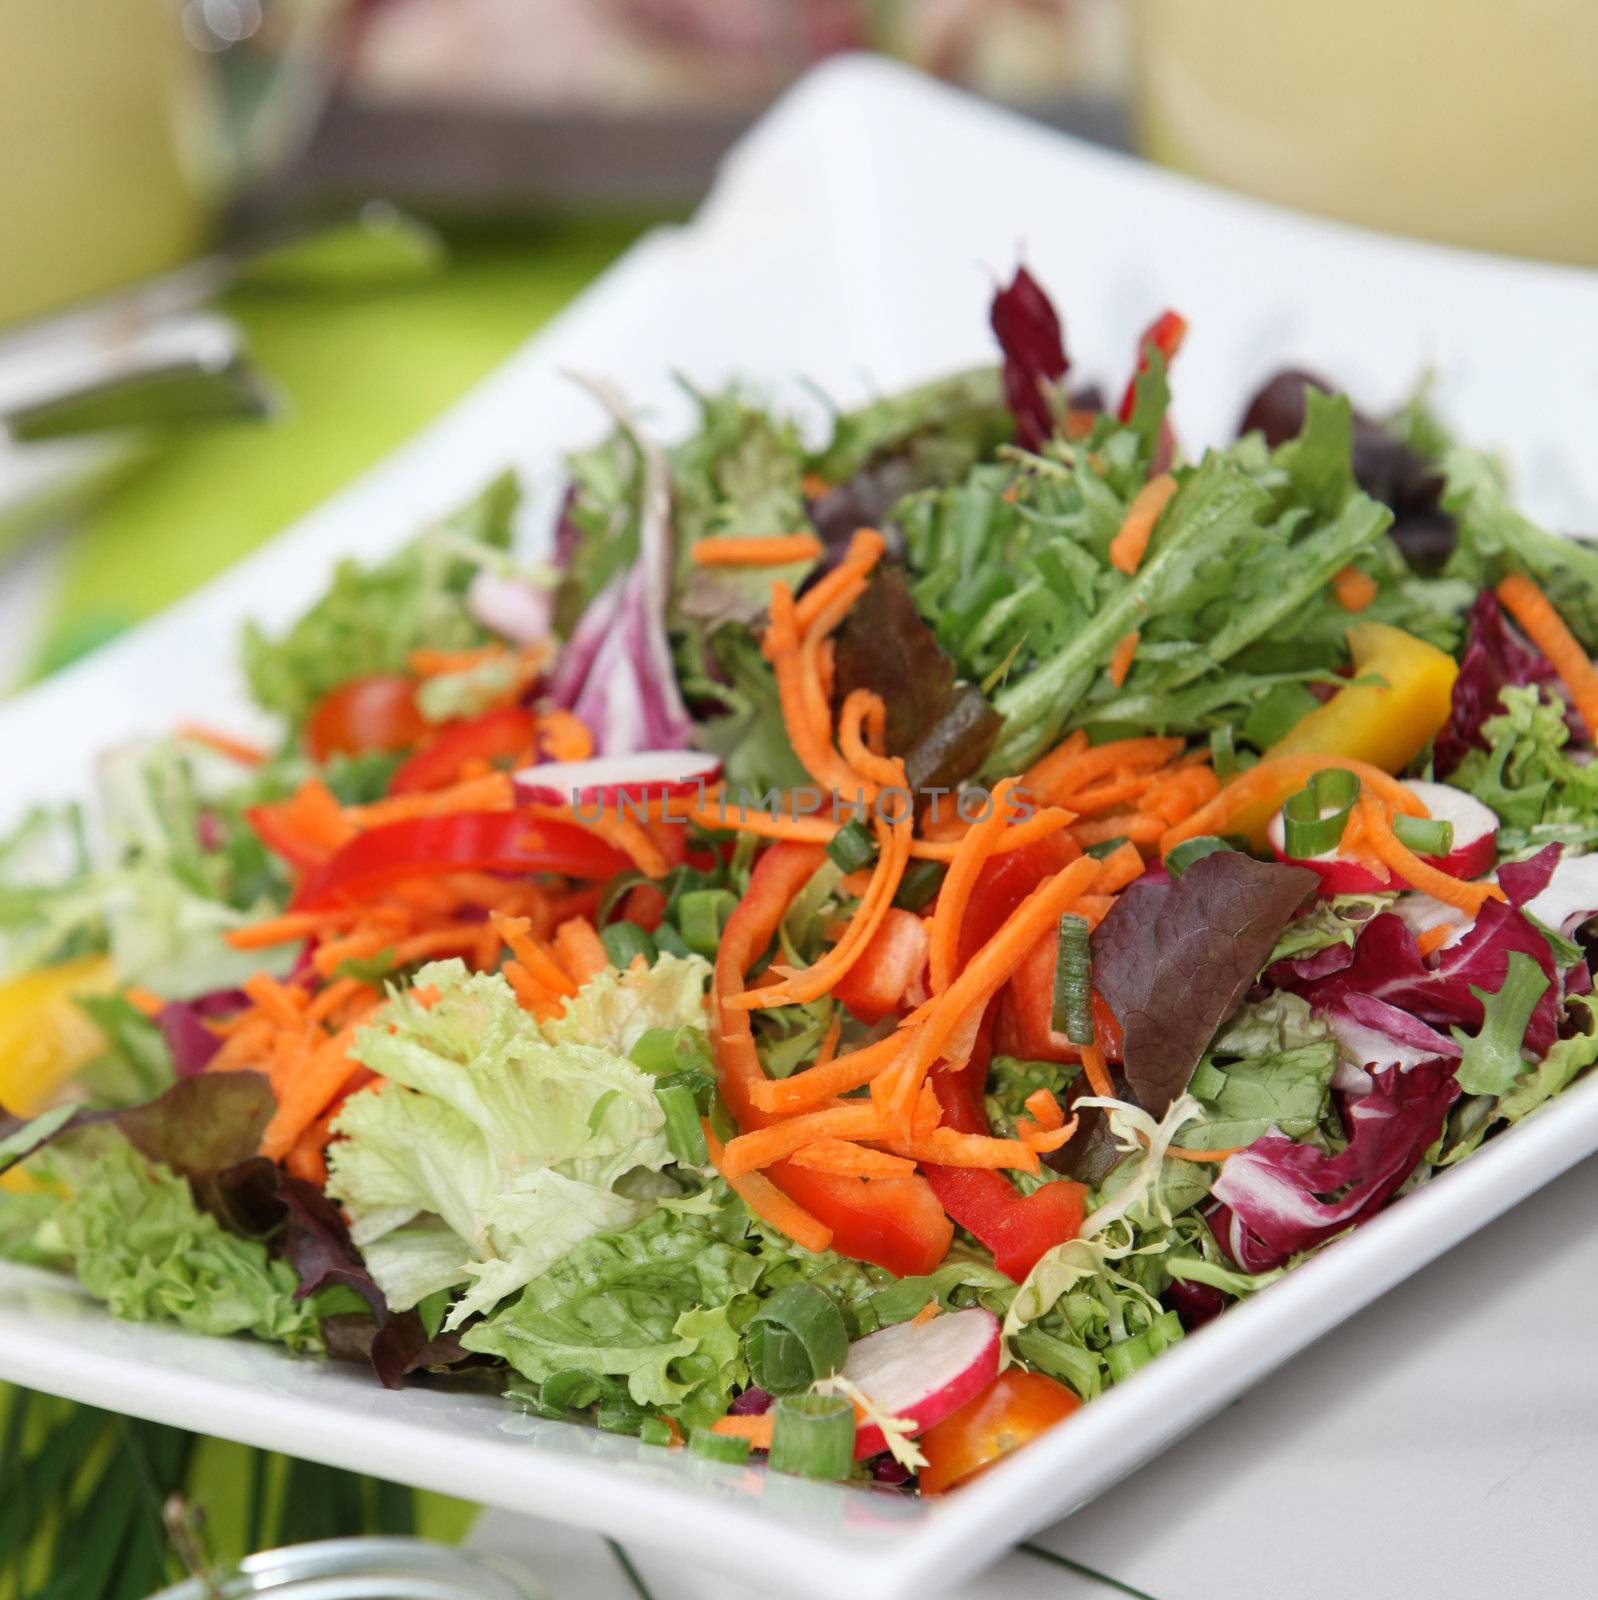 Mixed fresh salad with peppers, lettuce, tomatoes and carrots - square